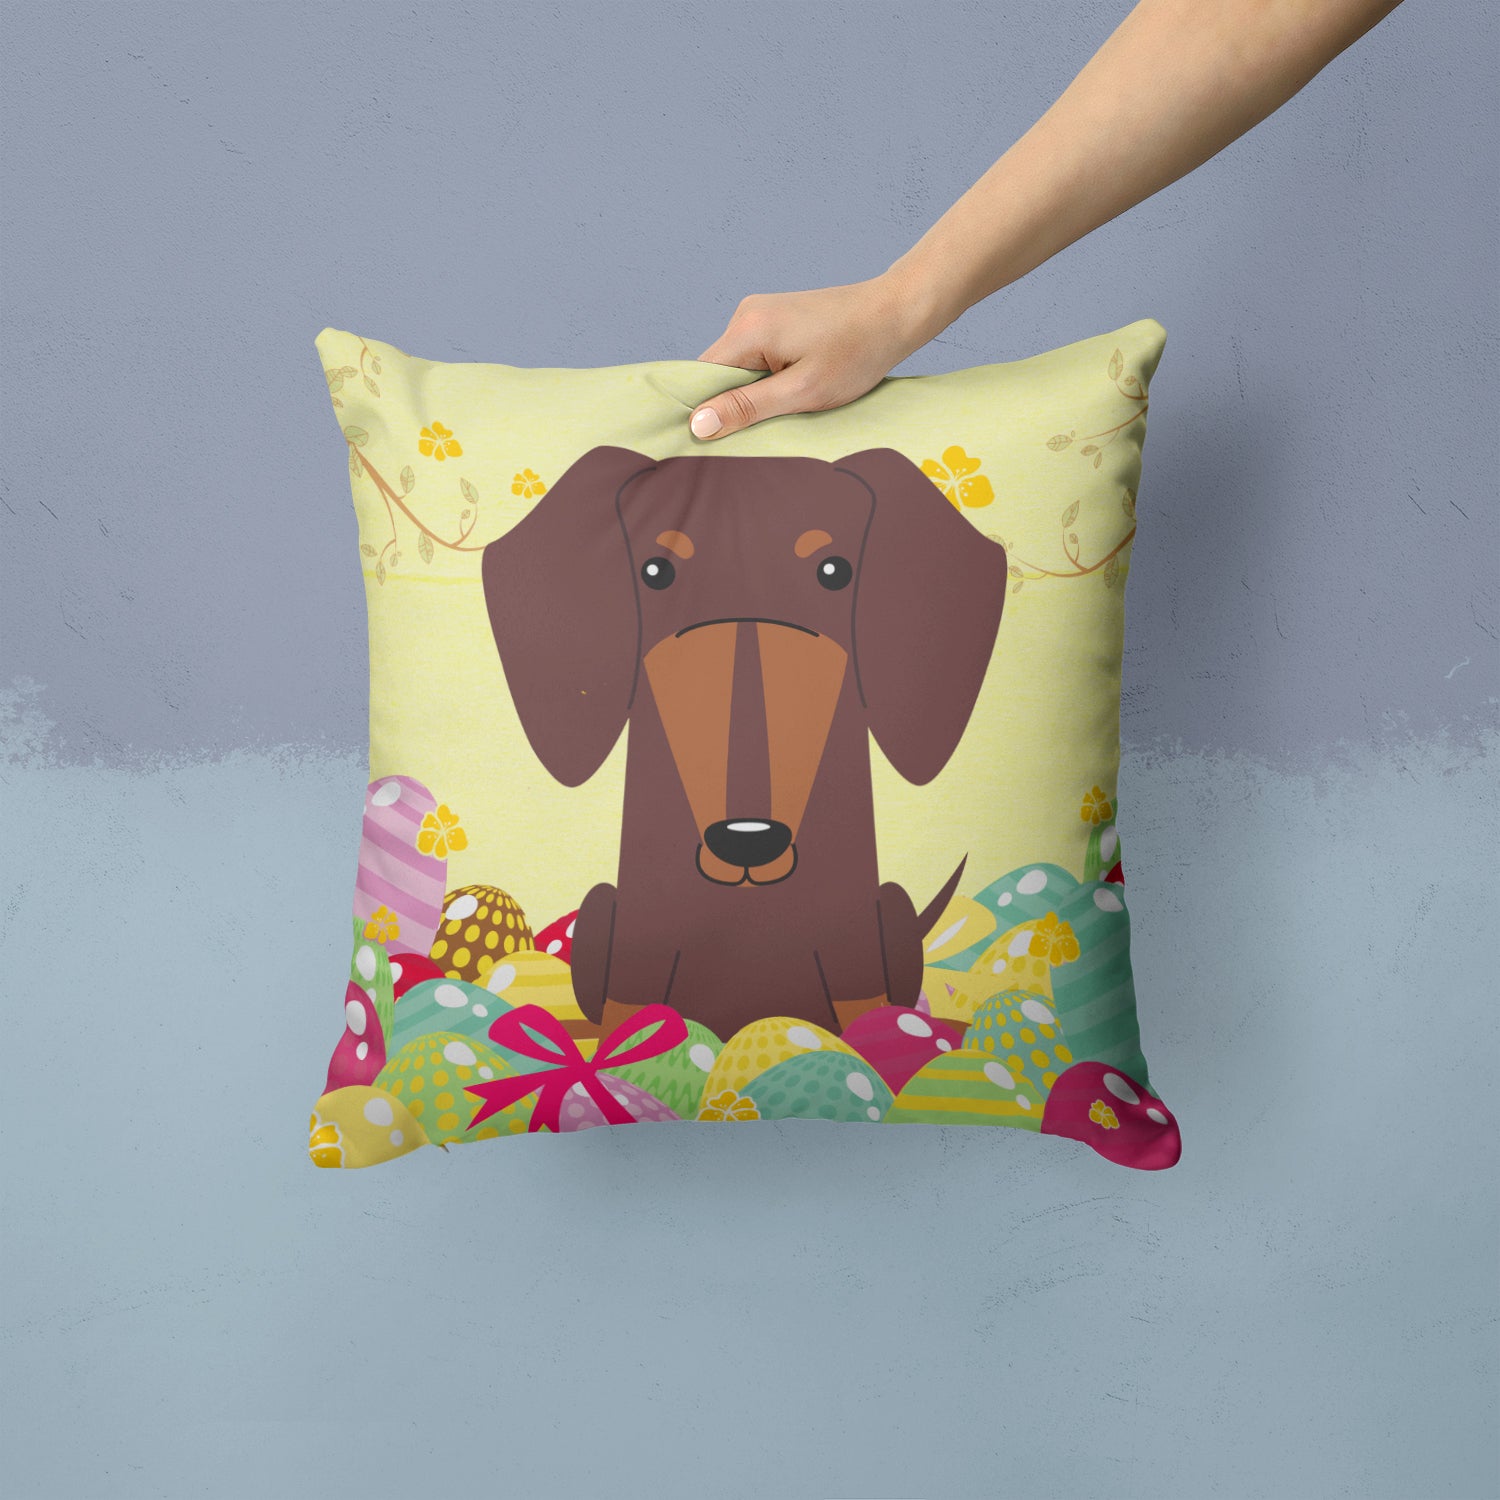 Easter Eggs Dachshund Chocolate Fabric Decorative Pillow BB6131PW1414 - the-store.com